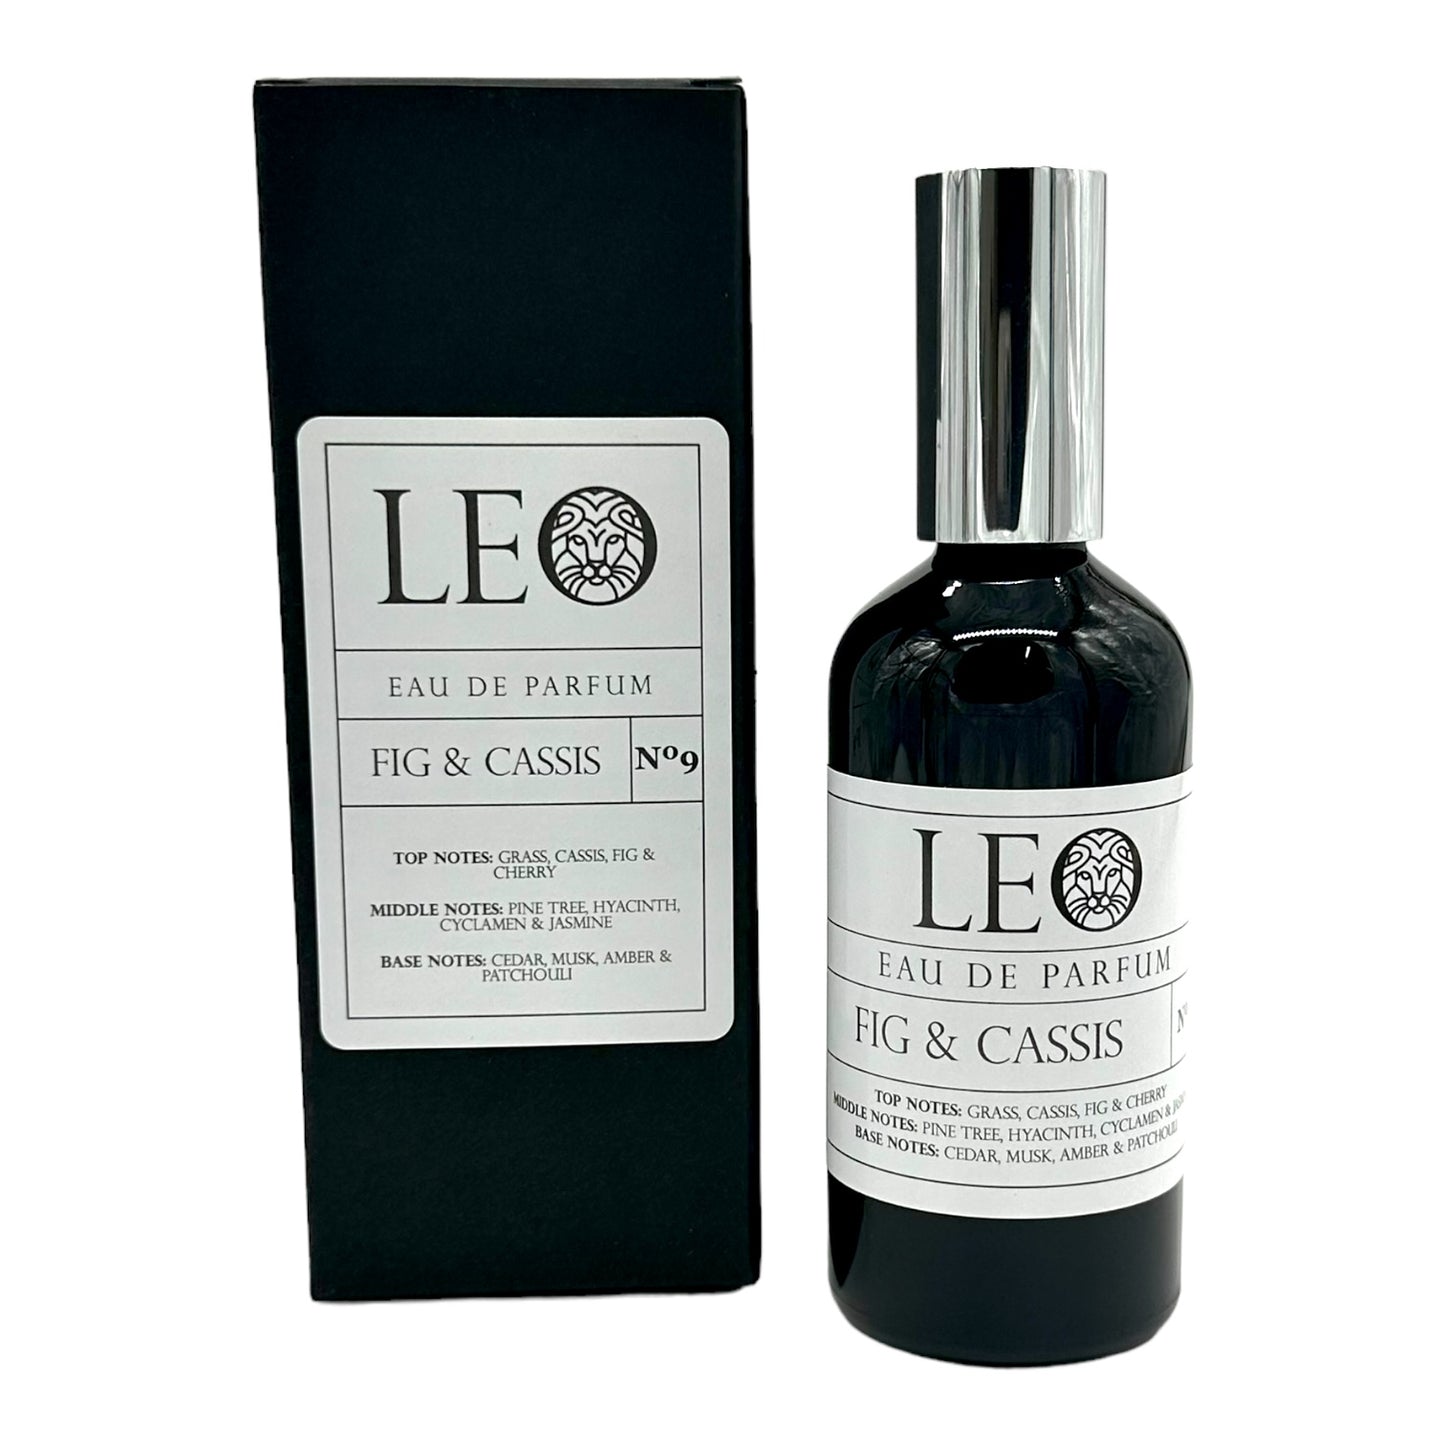 fig & cassis scented eau de parfum from leo with box